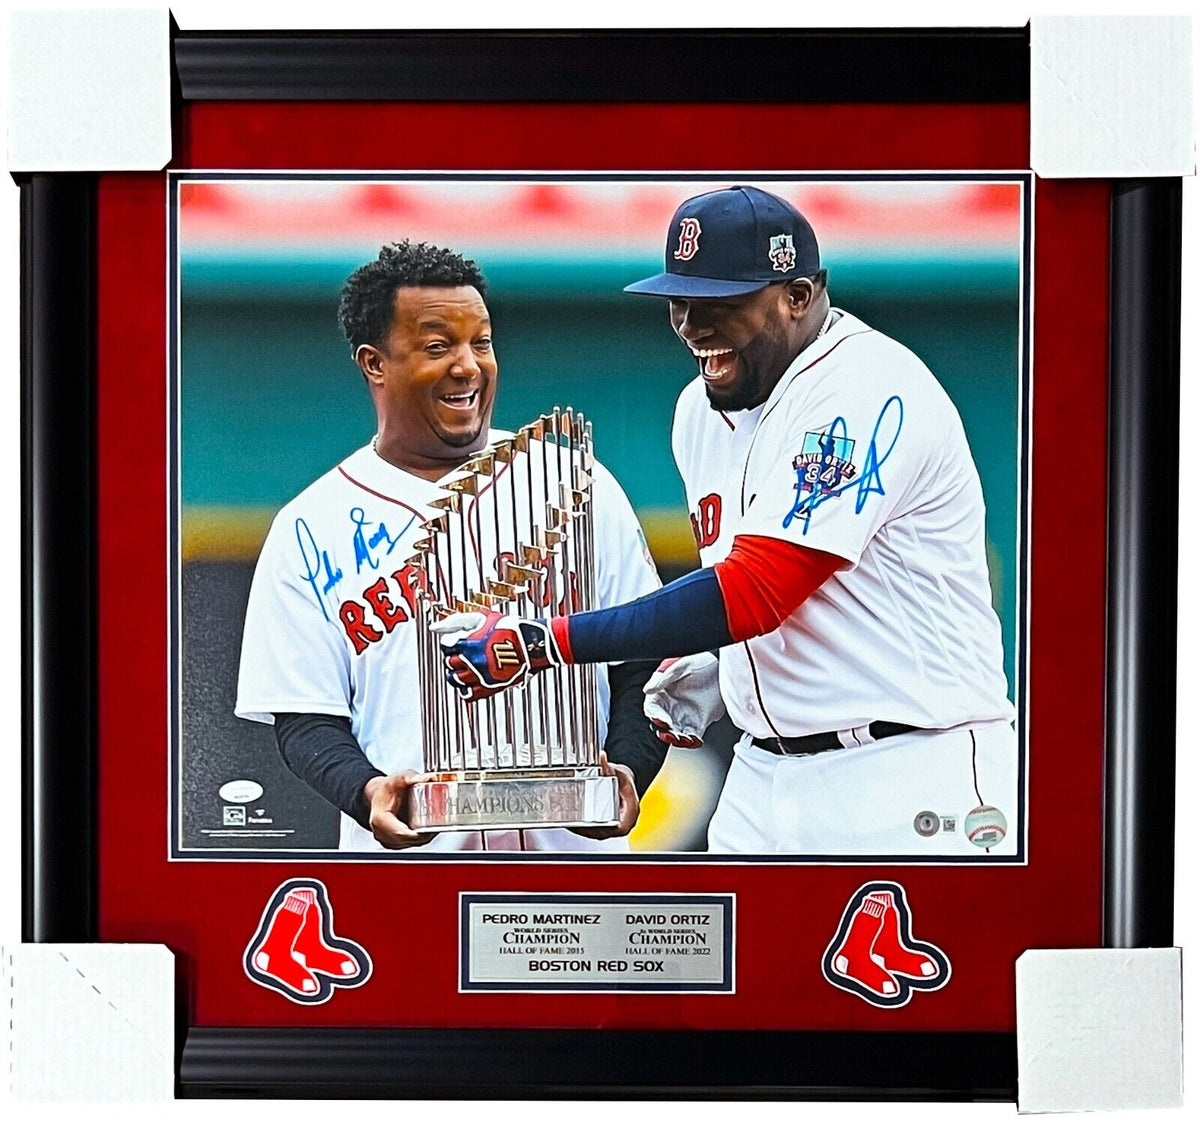 Pedro Martinez Boston Red Sox Autographed Framed 20'' x 24'' in Focus Photograph with ''HOF 15'' Inscription